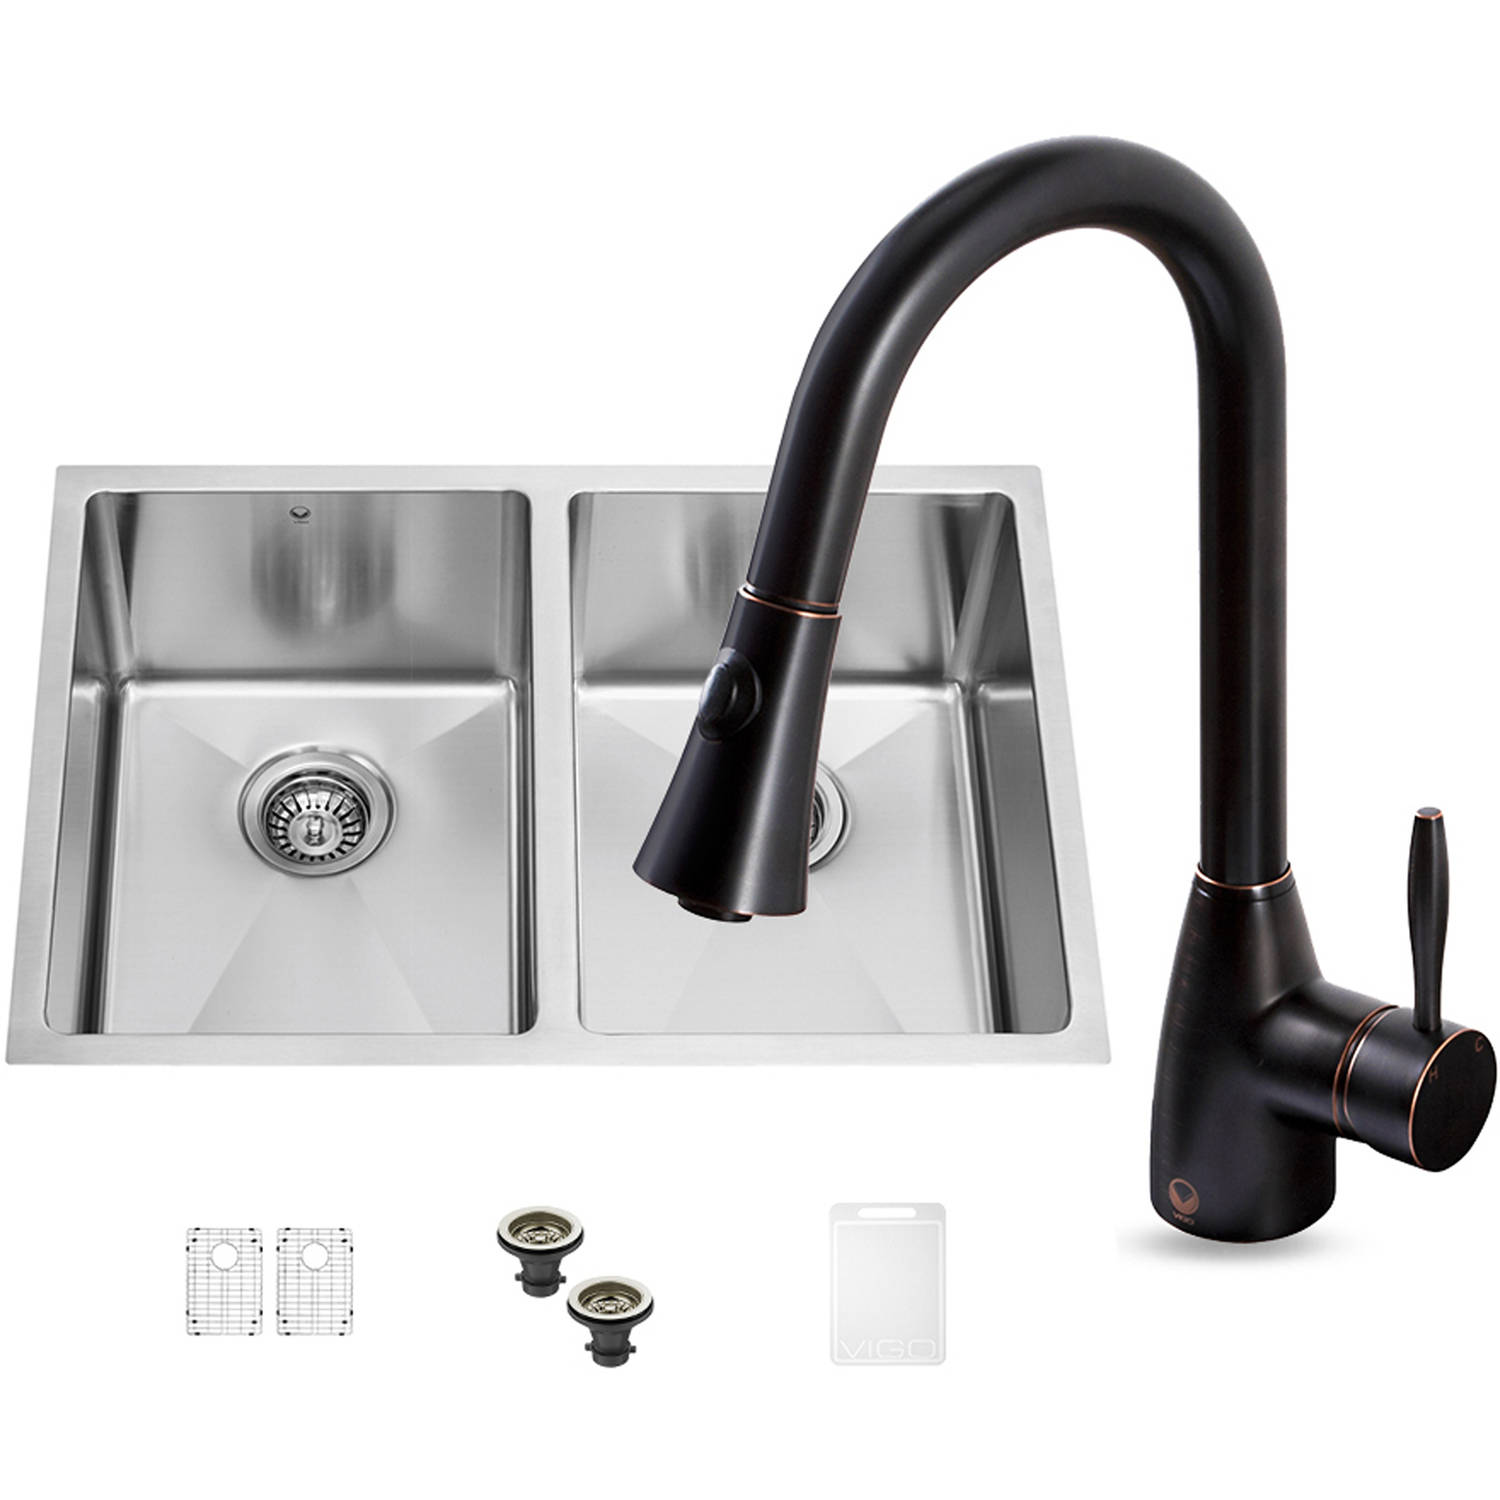 VIGO 29" Undermount Stainless Steel 16-Gauge Stainless Steel Double Kitchen Sink and Aylesbury Antique Rubbed Bronze Pull-Down Spray Kitchen Faucet - image 1 of 6